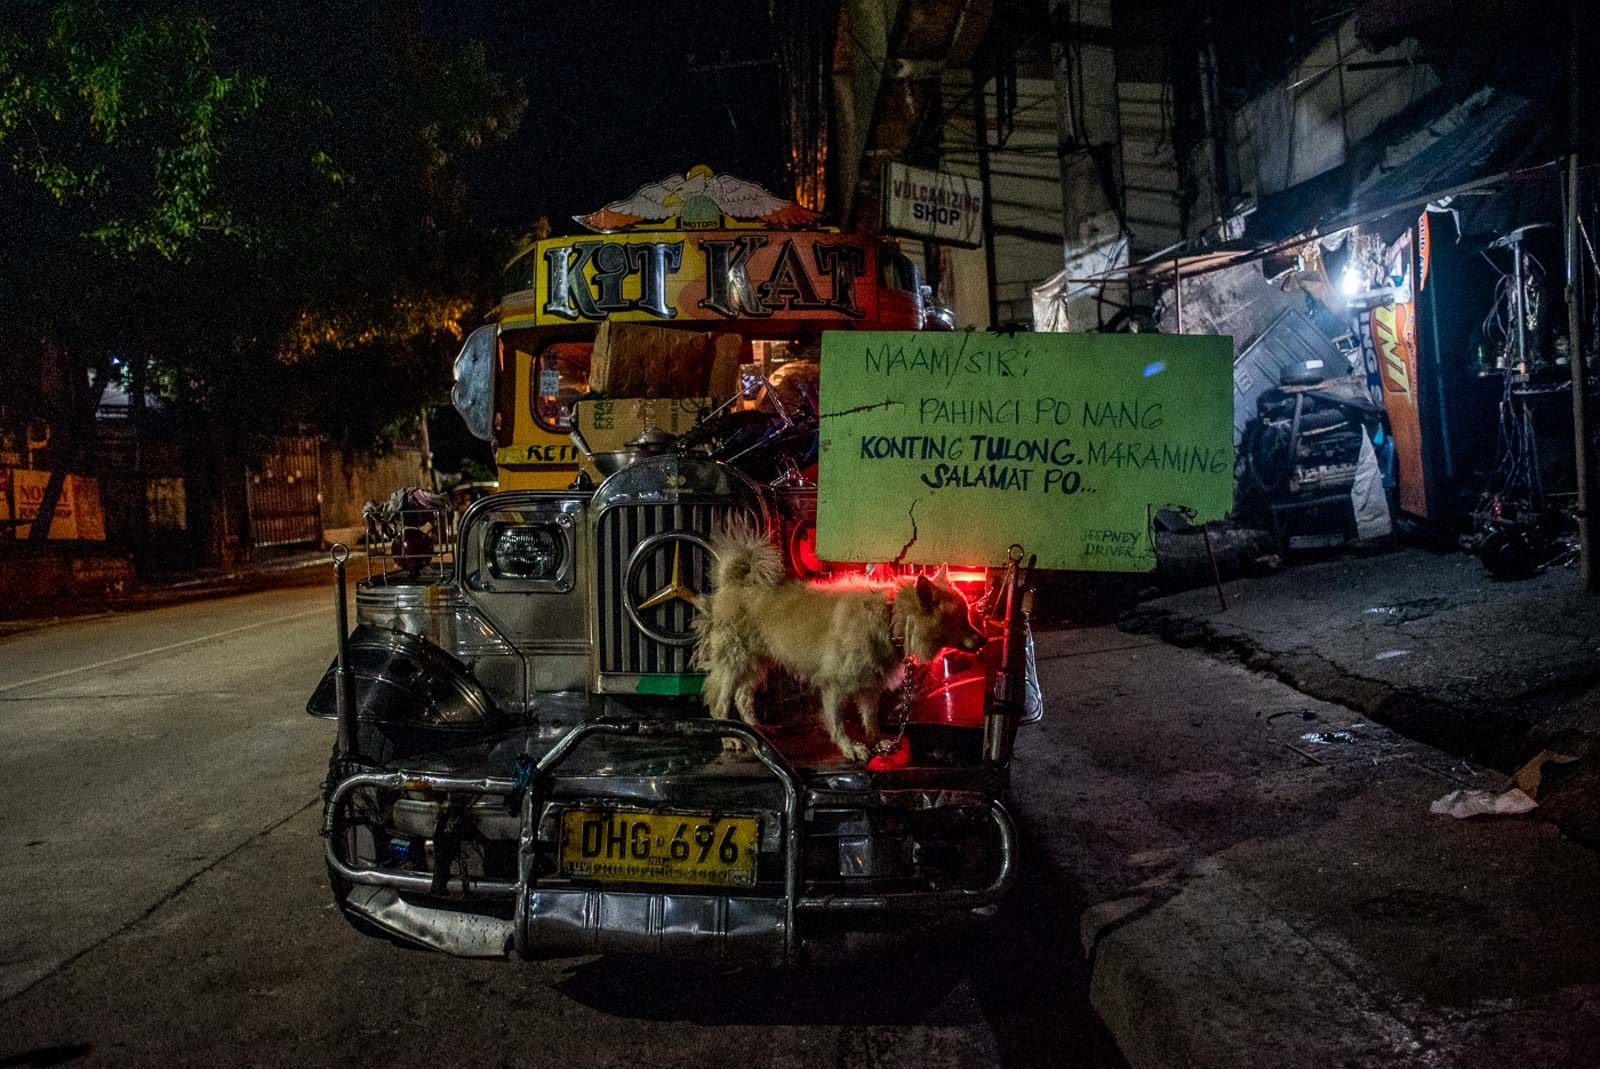 HELP. Julius parked the jeepney across his operator's vulcanizing at night. Their rescue dog, Chuchi, stays in front to guard the signage. 